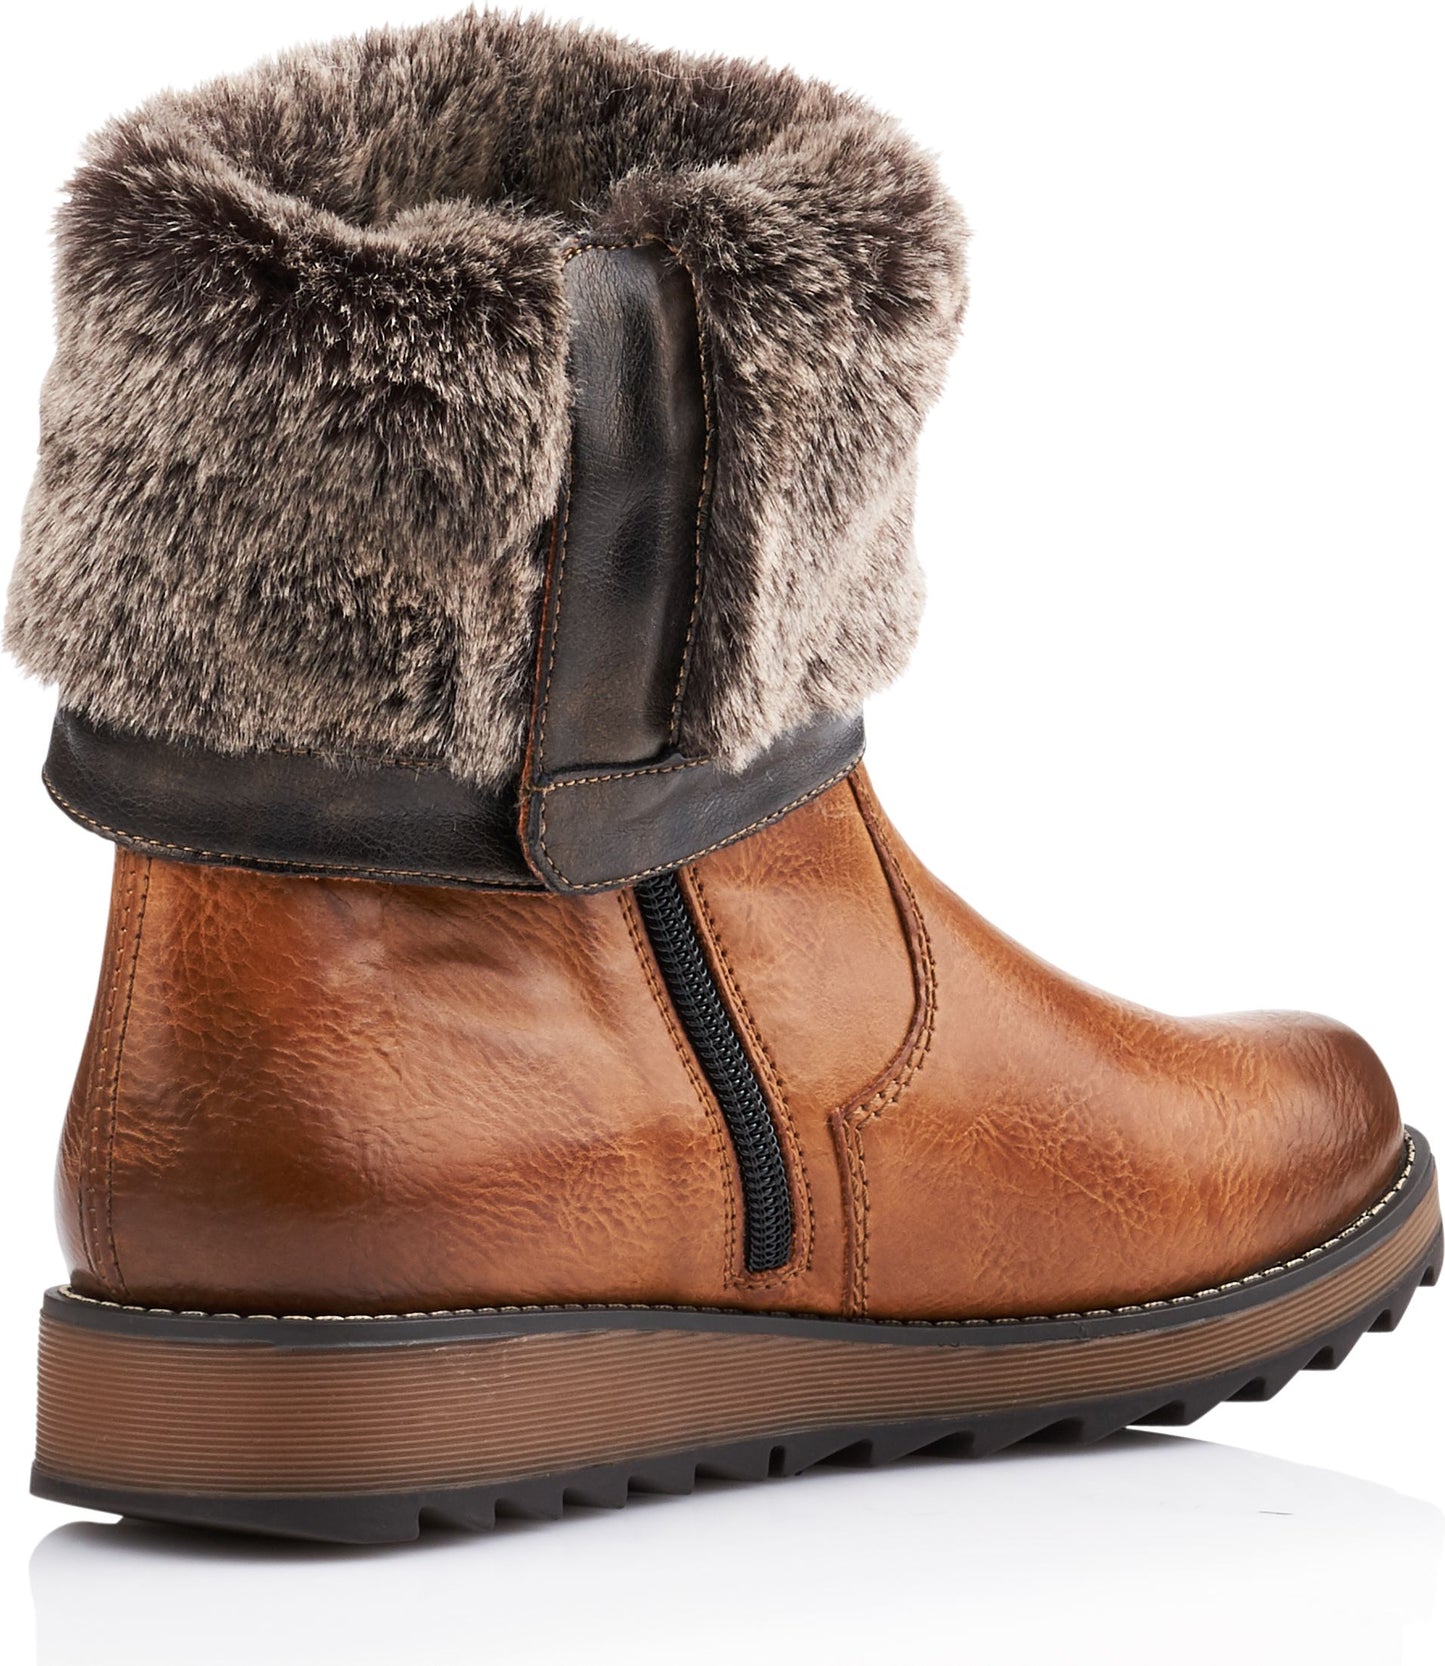 Remonte Boots D8874-24 - Tan Fold Down Boot